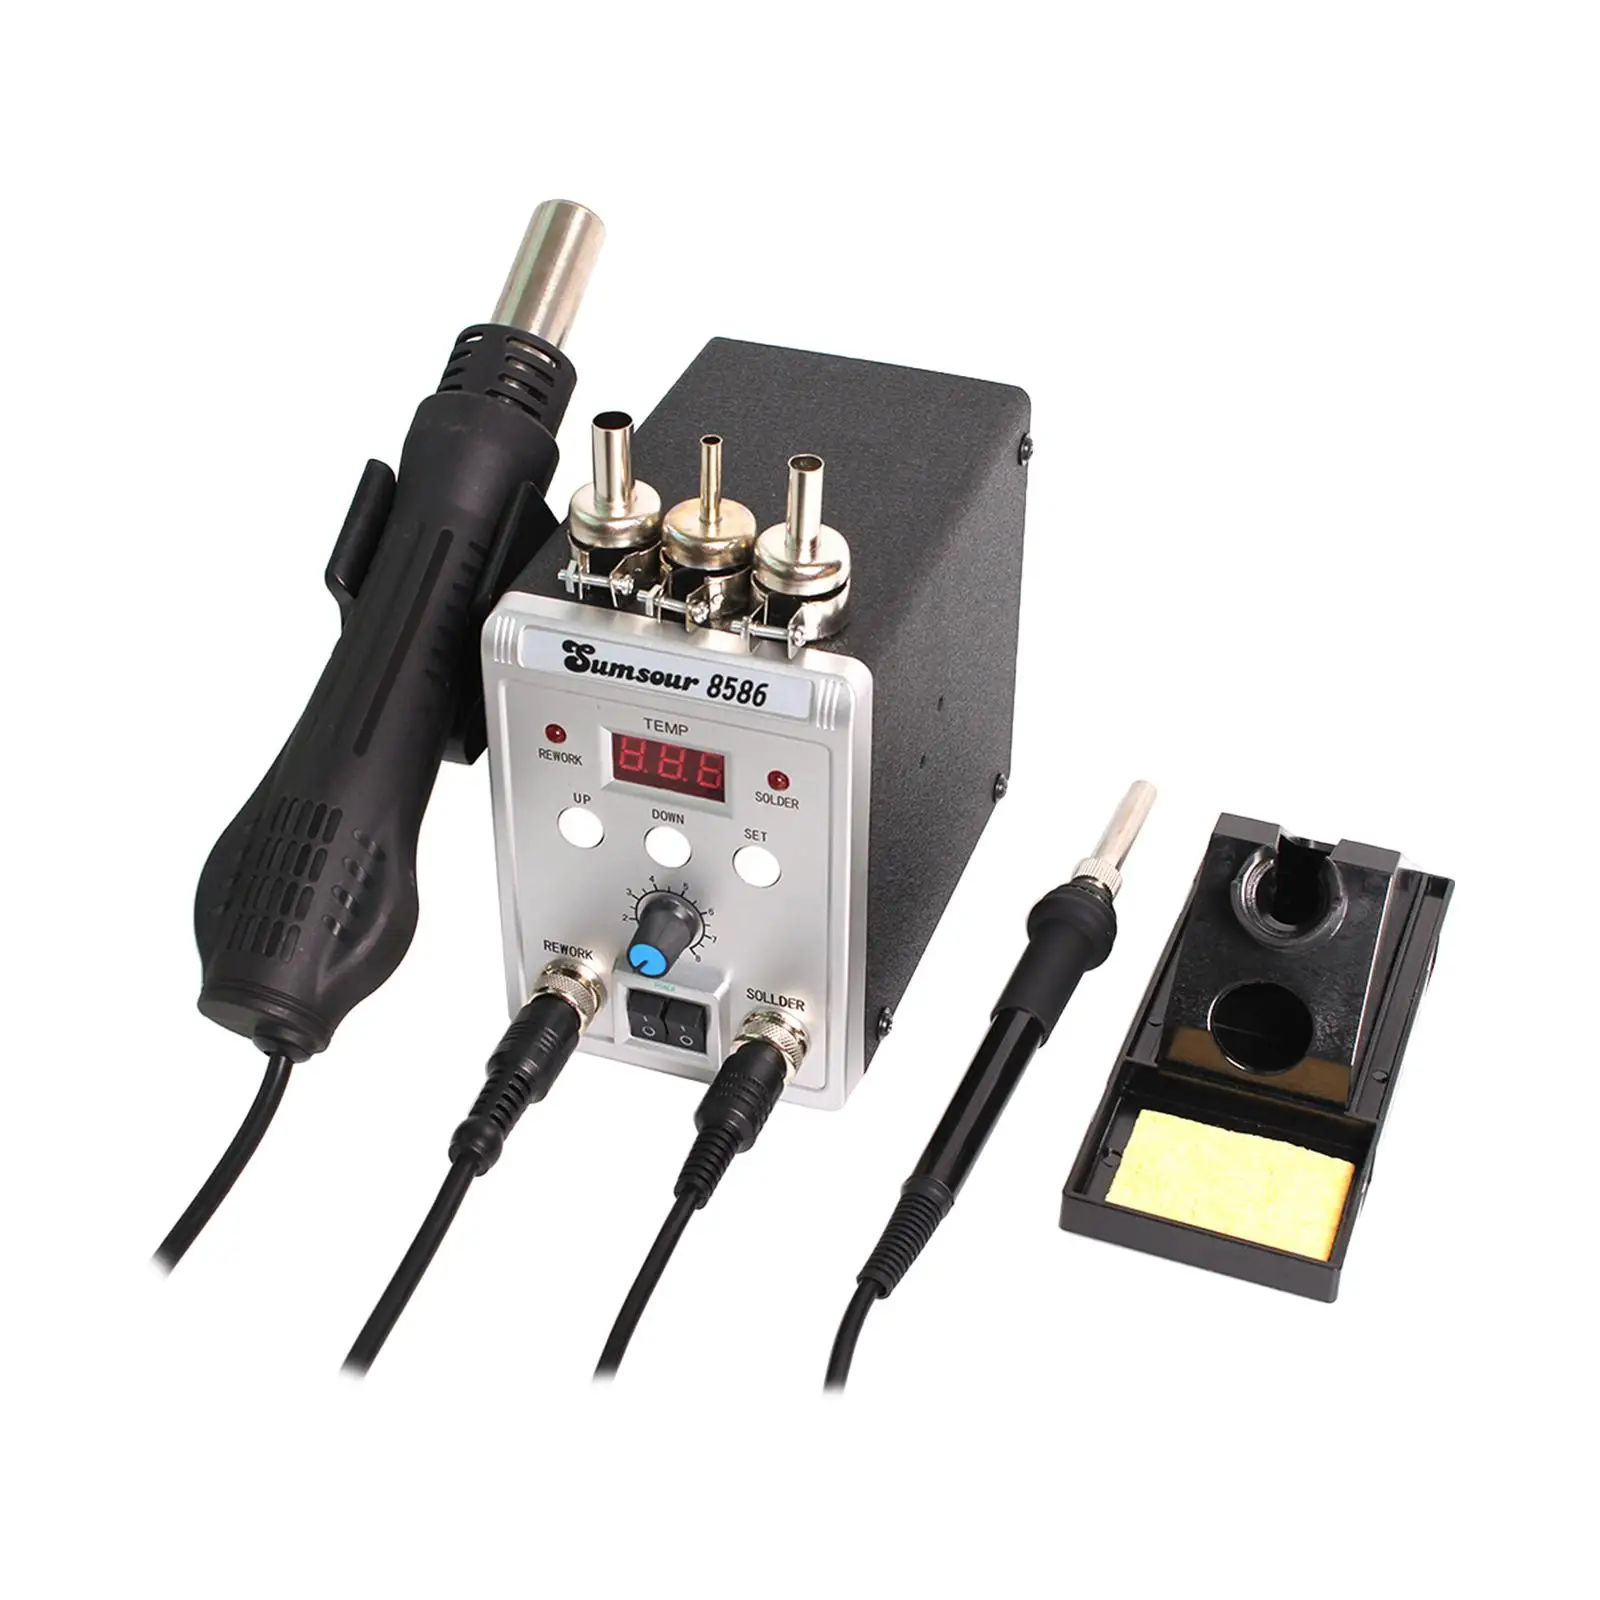 60W Soldering Iron Station Durable Fast Heating Electric Welding Tool for Home Appliance DIY Repairs Laptop Maintenance Phone